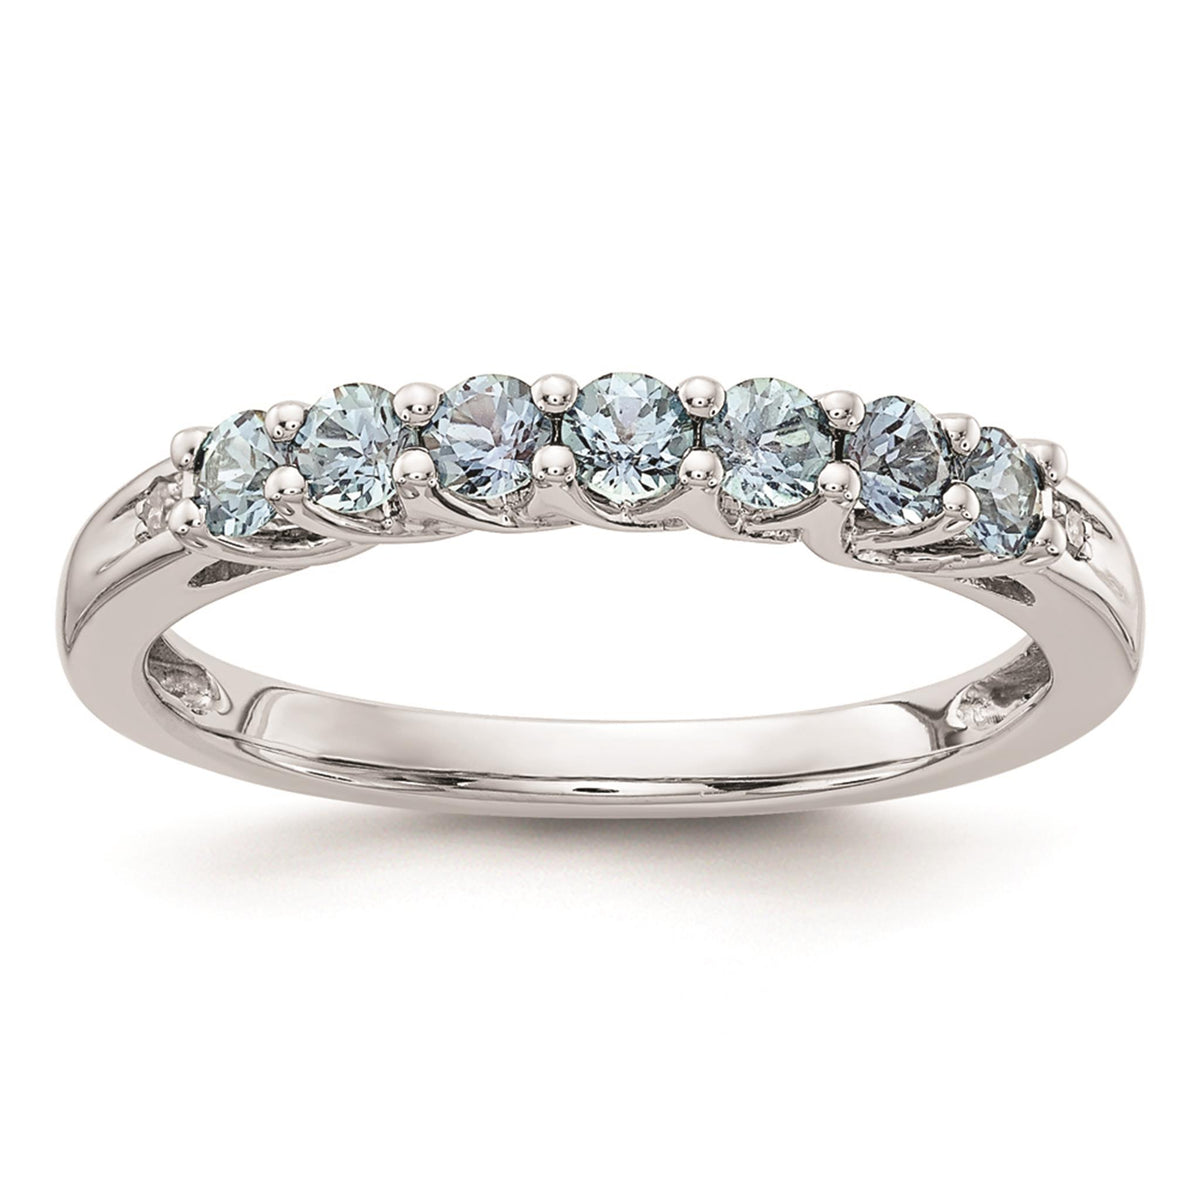 10Kt White Gold Stackable Ring With Aquamarine